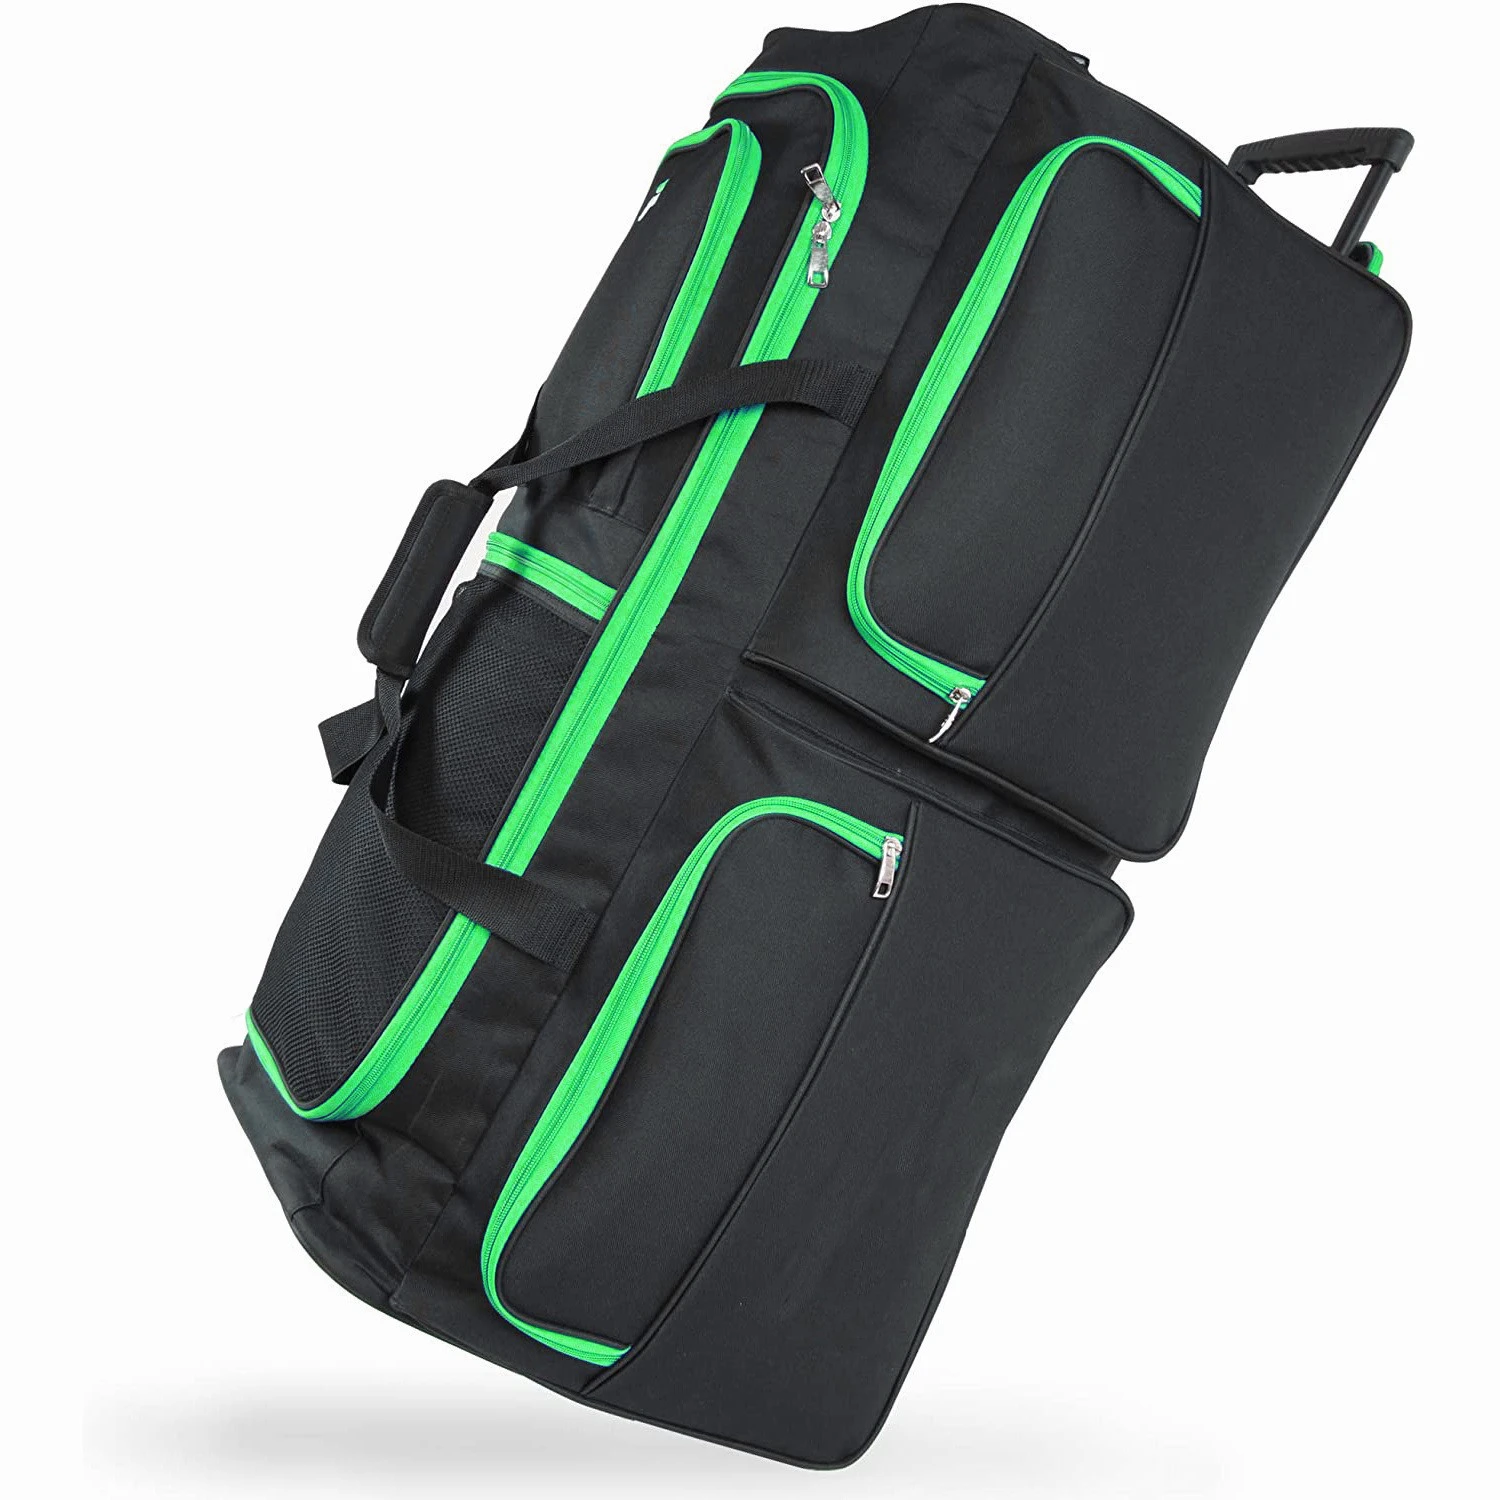 Large Rolling Duffel Bag Luggage with Wheels